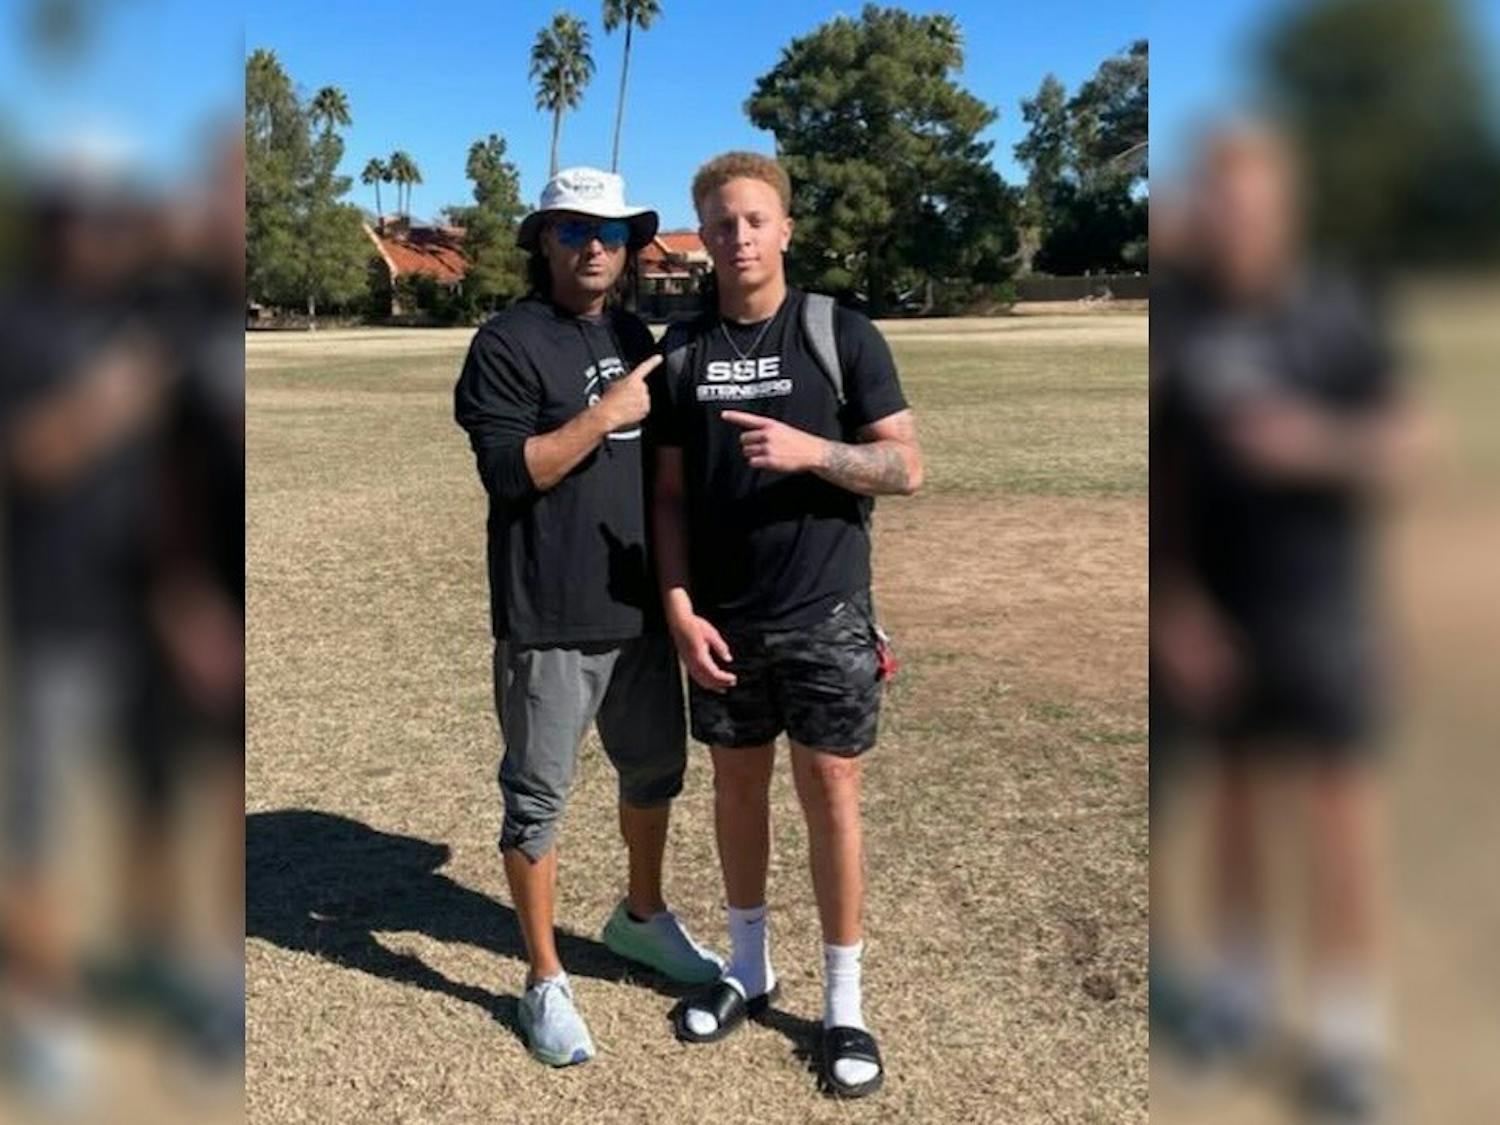 Mike Giovando (left) and Spencer Rattler (right) in Scottsdale, Arizona in January 2022.